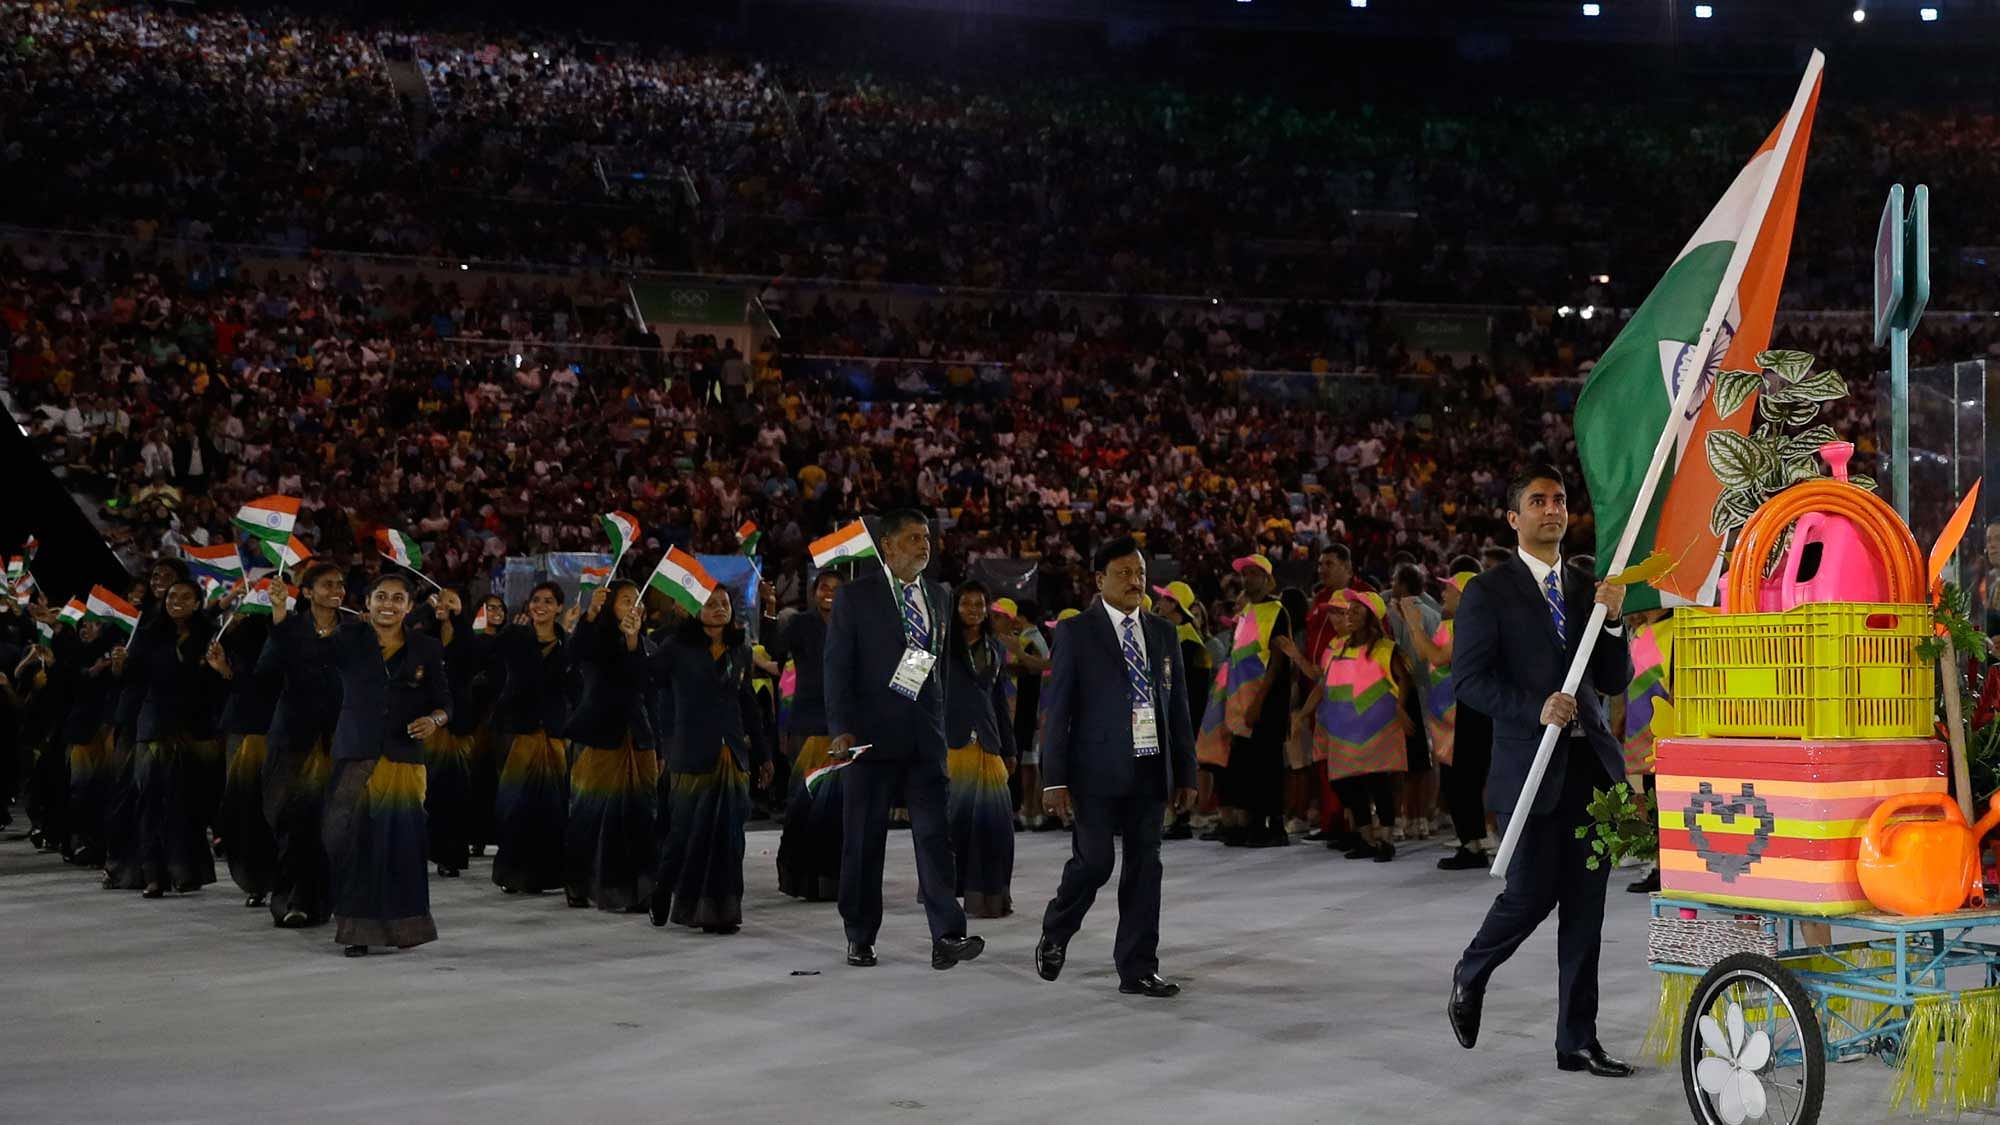 Abhinav Bindra carries the flag of India during the opening ceremony for the 2016 Summer Olympics in Rio de Janeiro, Brazil, Friday, Aug. 5, 2016. (AP Photo/Patrick Semansky)